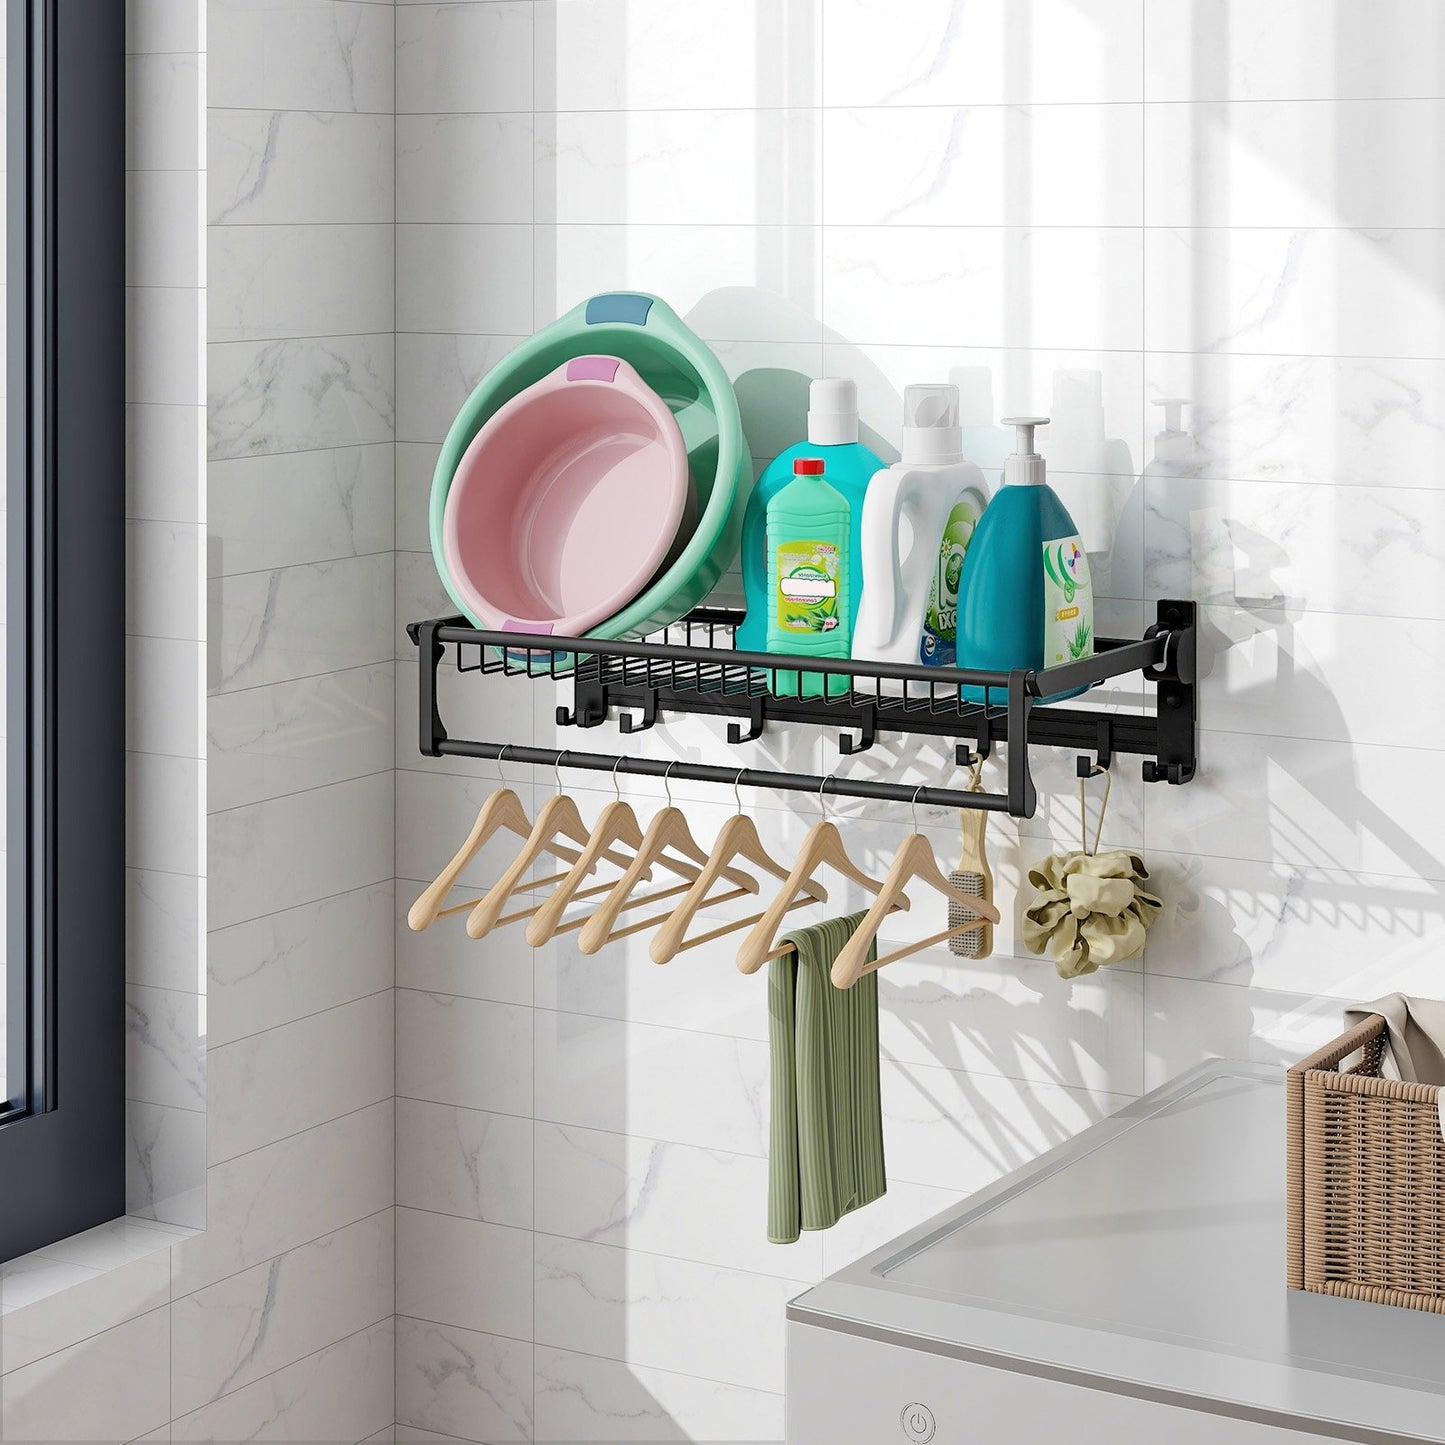 Wall Mounted Towel Shelf with Adjustable Towel Bar and Movable Hooks No Assembly Required